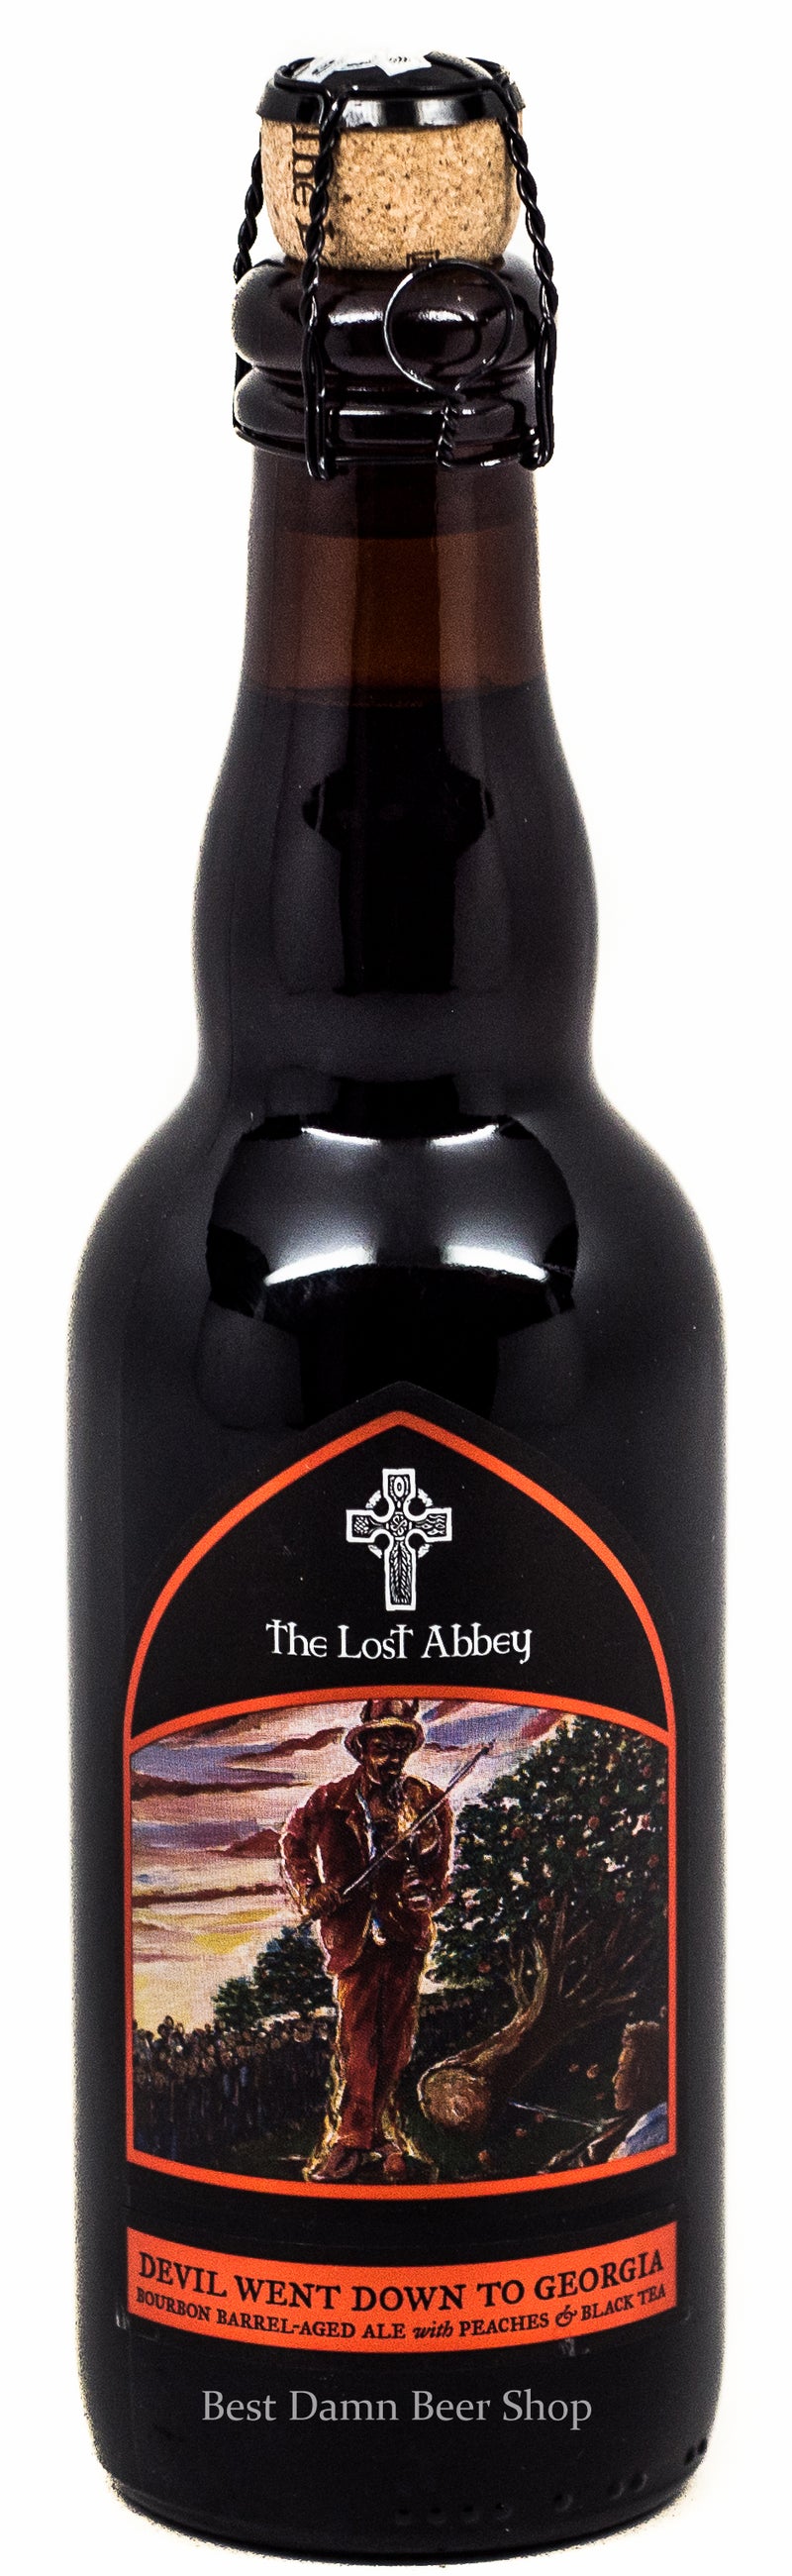 The Lost abbey﻿ Track